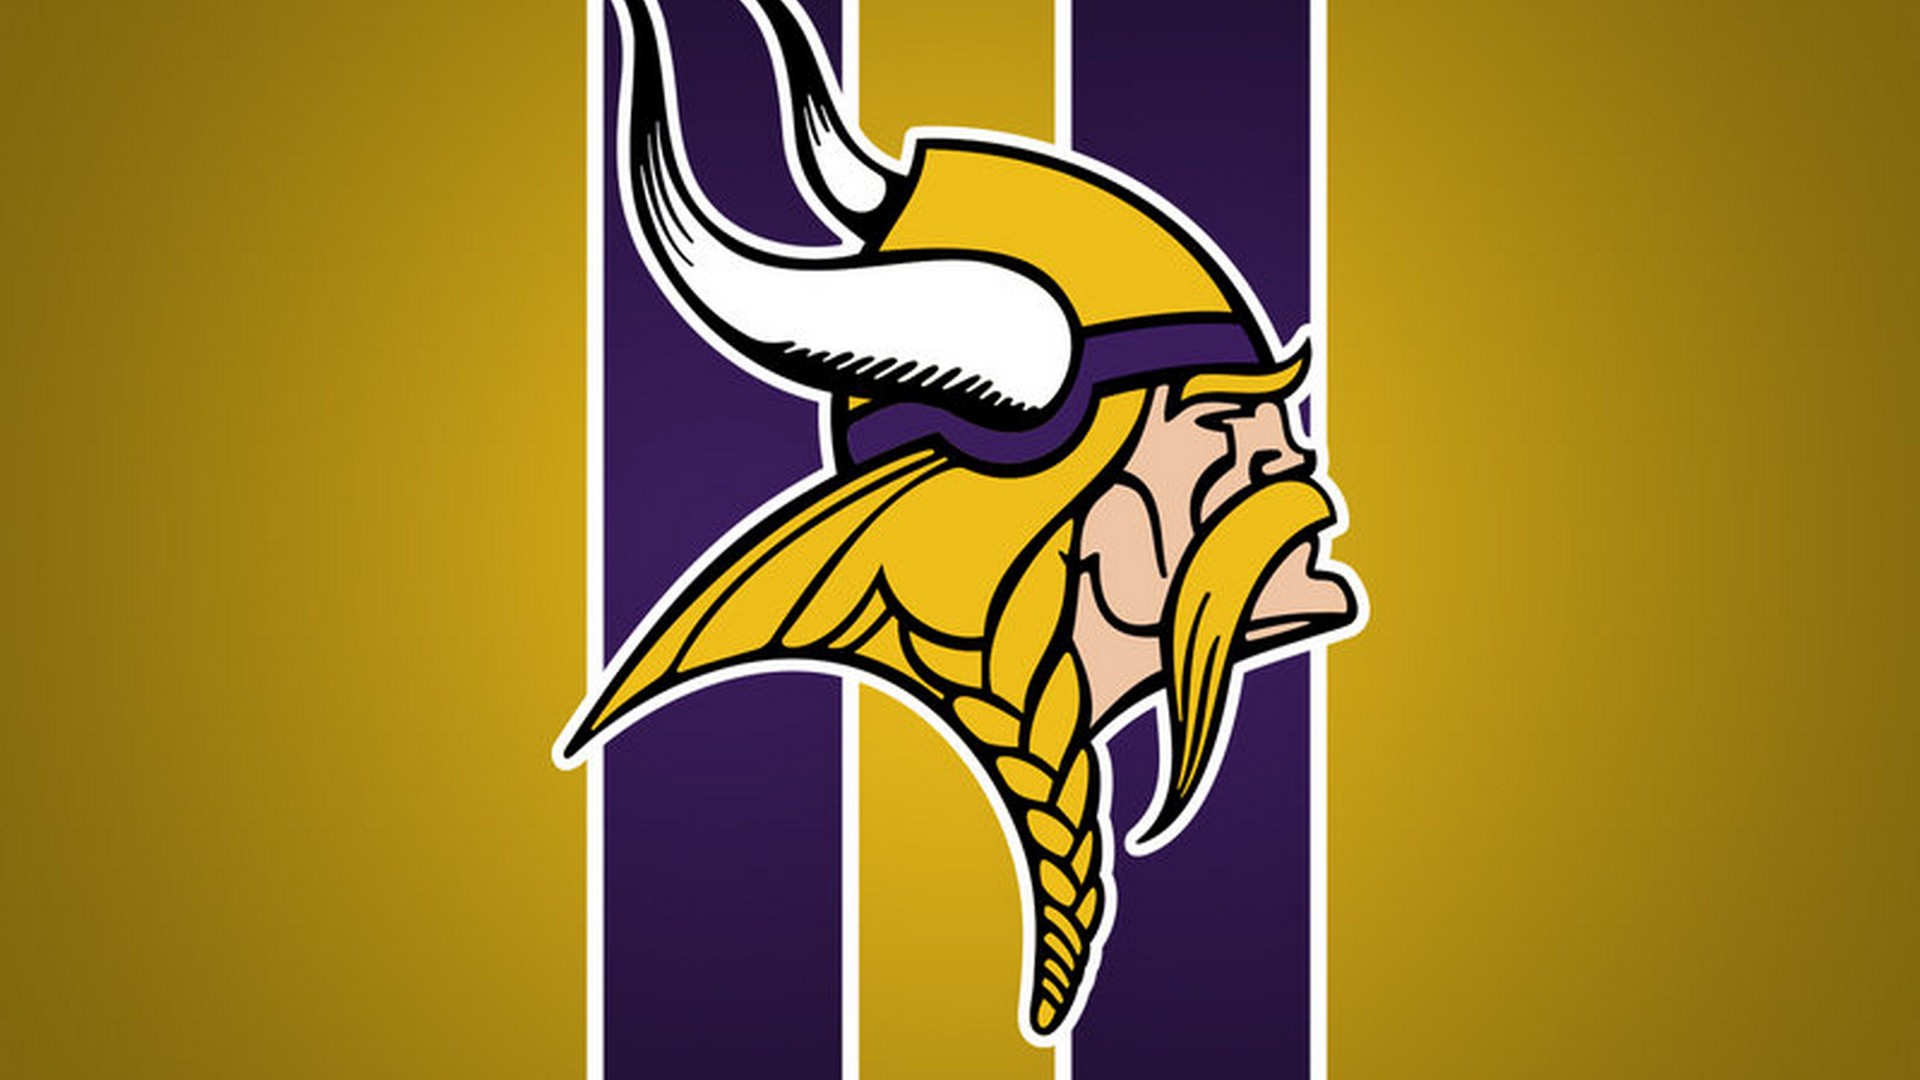 HD Minnesota Vikings Backgrounds with resolution 1920x1080 pixel. You can make this wallpaper for your Mac or Windows Desktop Background, iPhone, Android or Tablet and another Smartphone device